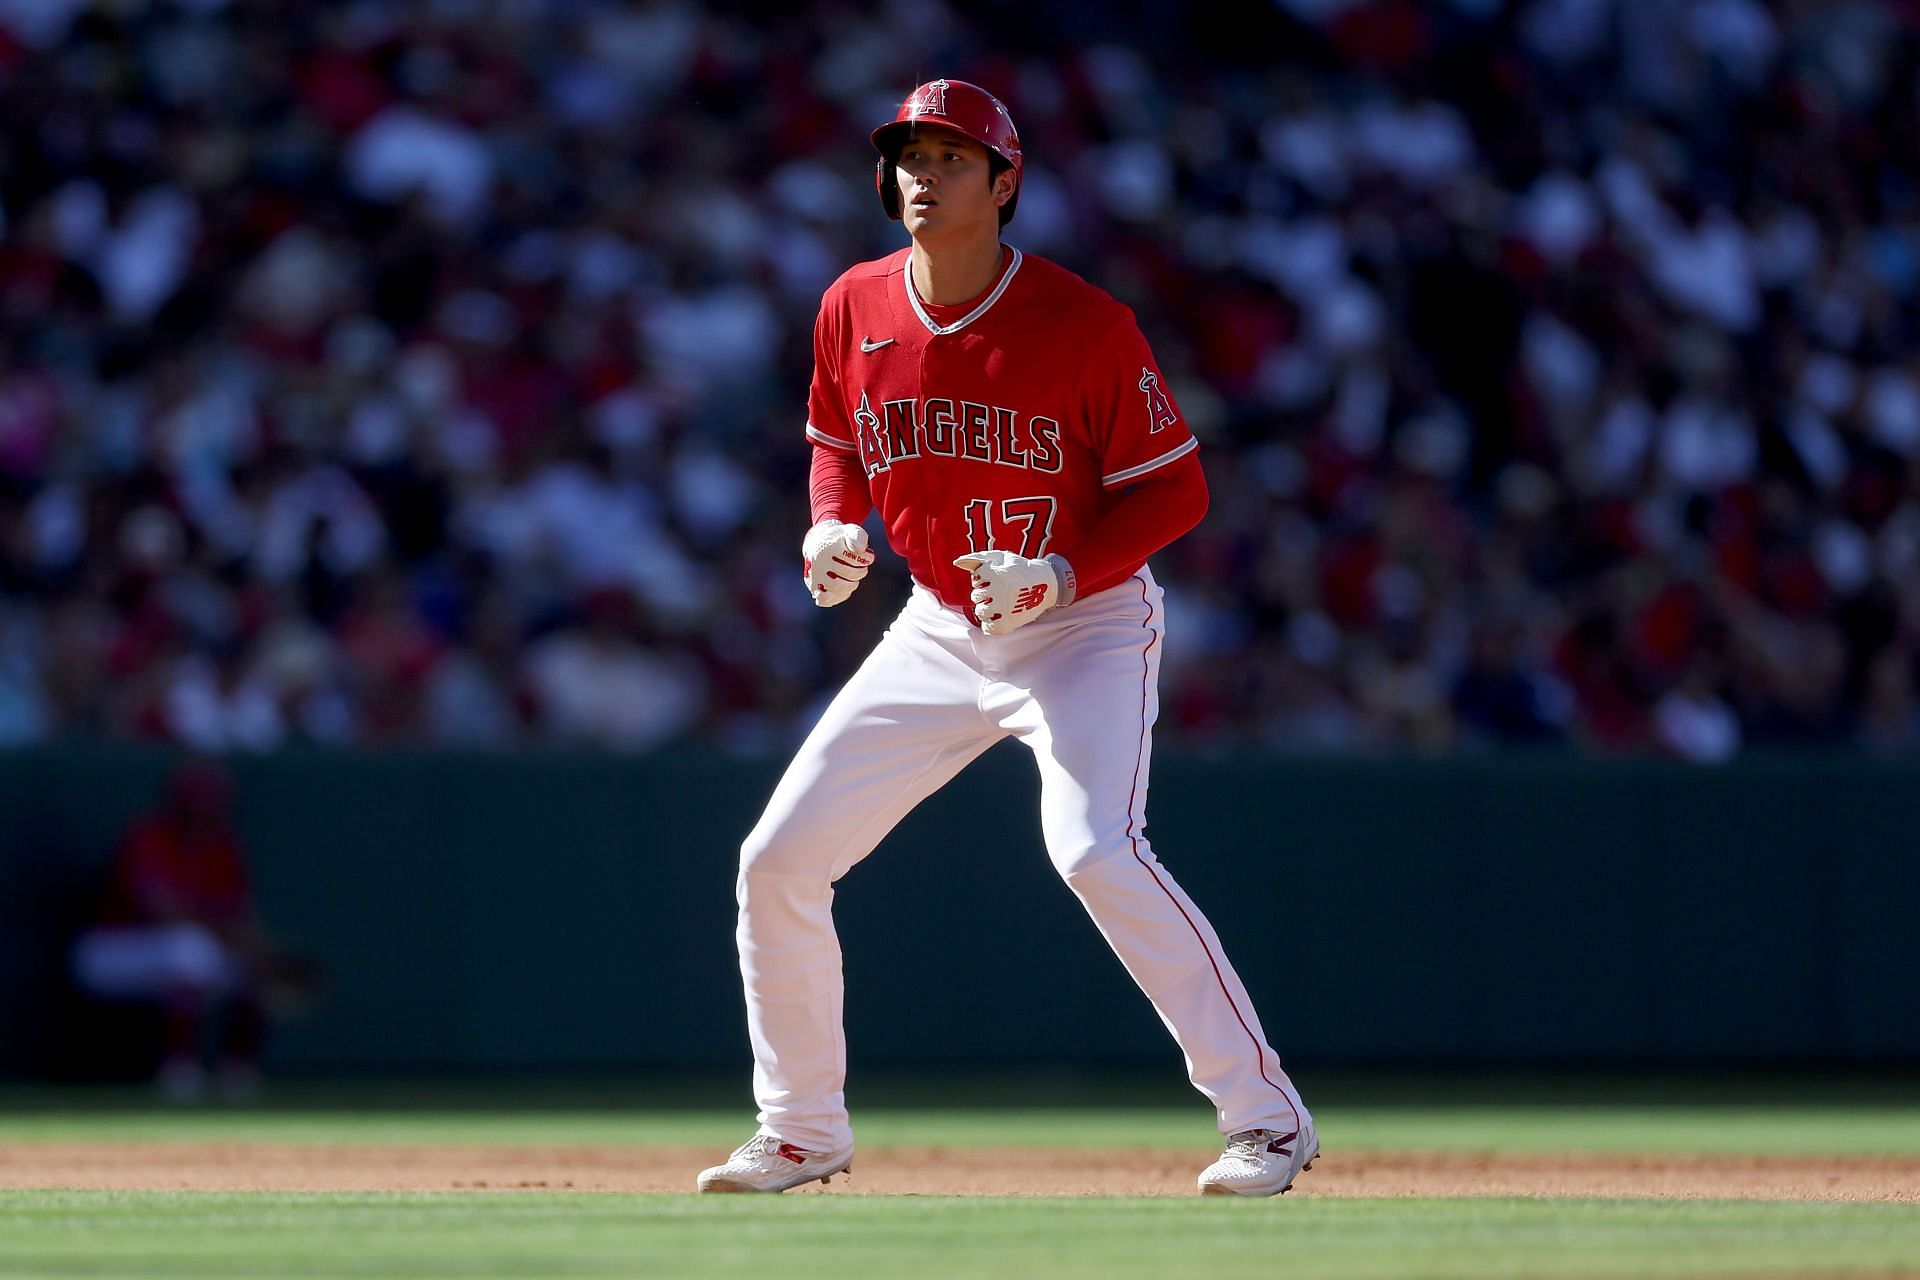 Shohei Ohtani of the Los Angeles Angels leads off second base at Angel Stadium of Anaheim